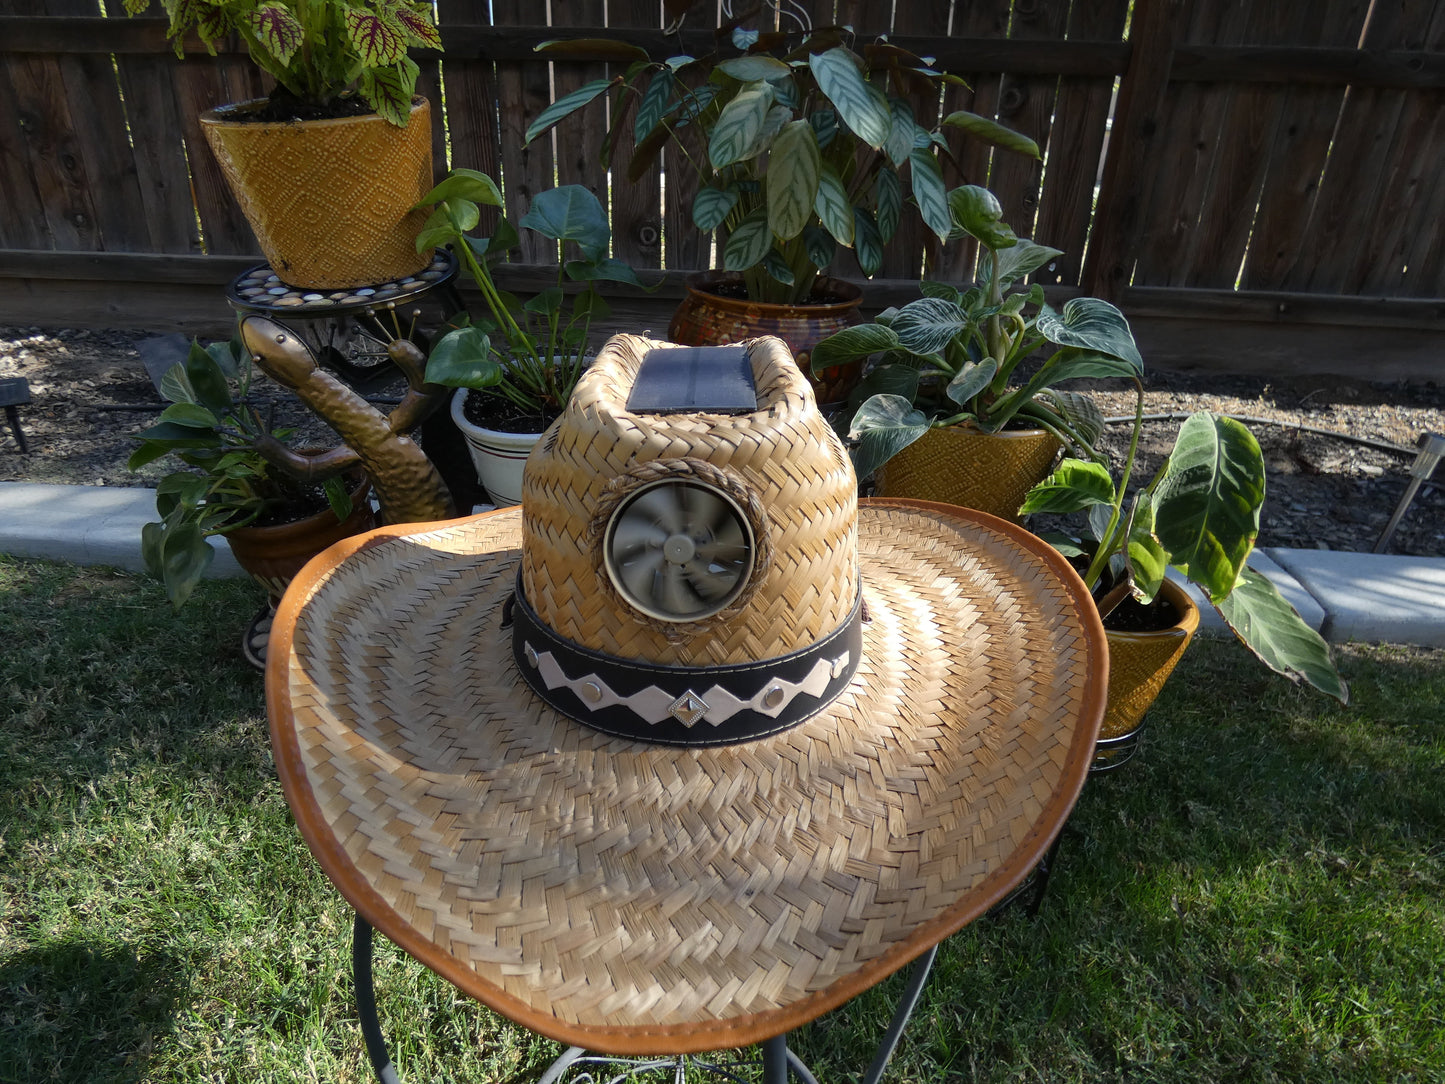 Cowboy with Band Solar Hat - Sun Hat with Fan, Large